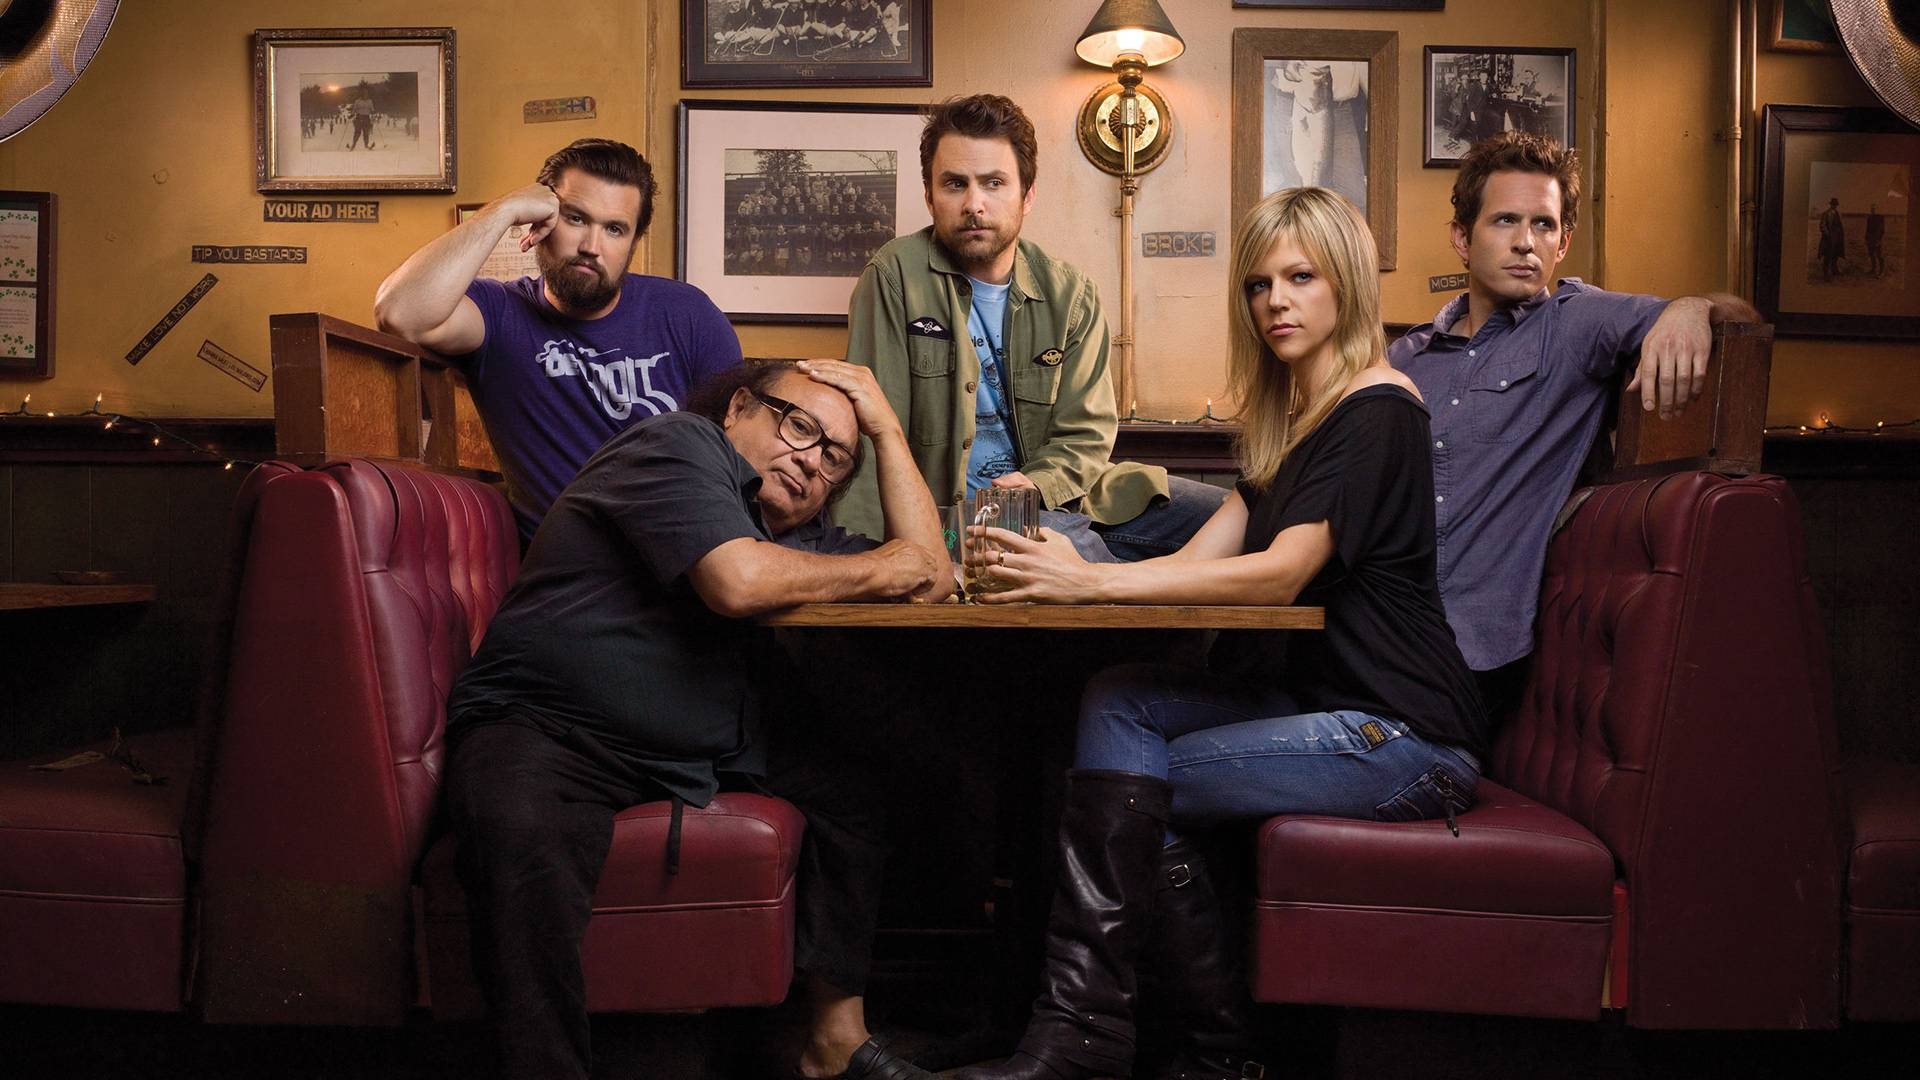 It's Always Sunny in Philadelphia (TV Series): Philadelphia, Five toxically co-dependent and selfishly motivated friends, A decrepit Irish bar owners. 1920x1080 Full HD Background.